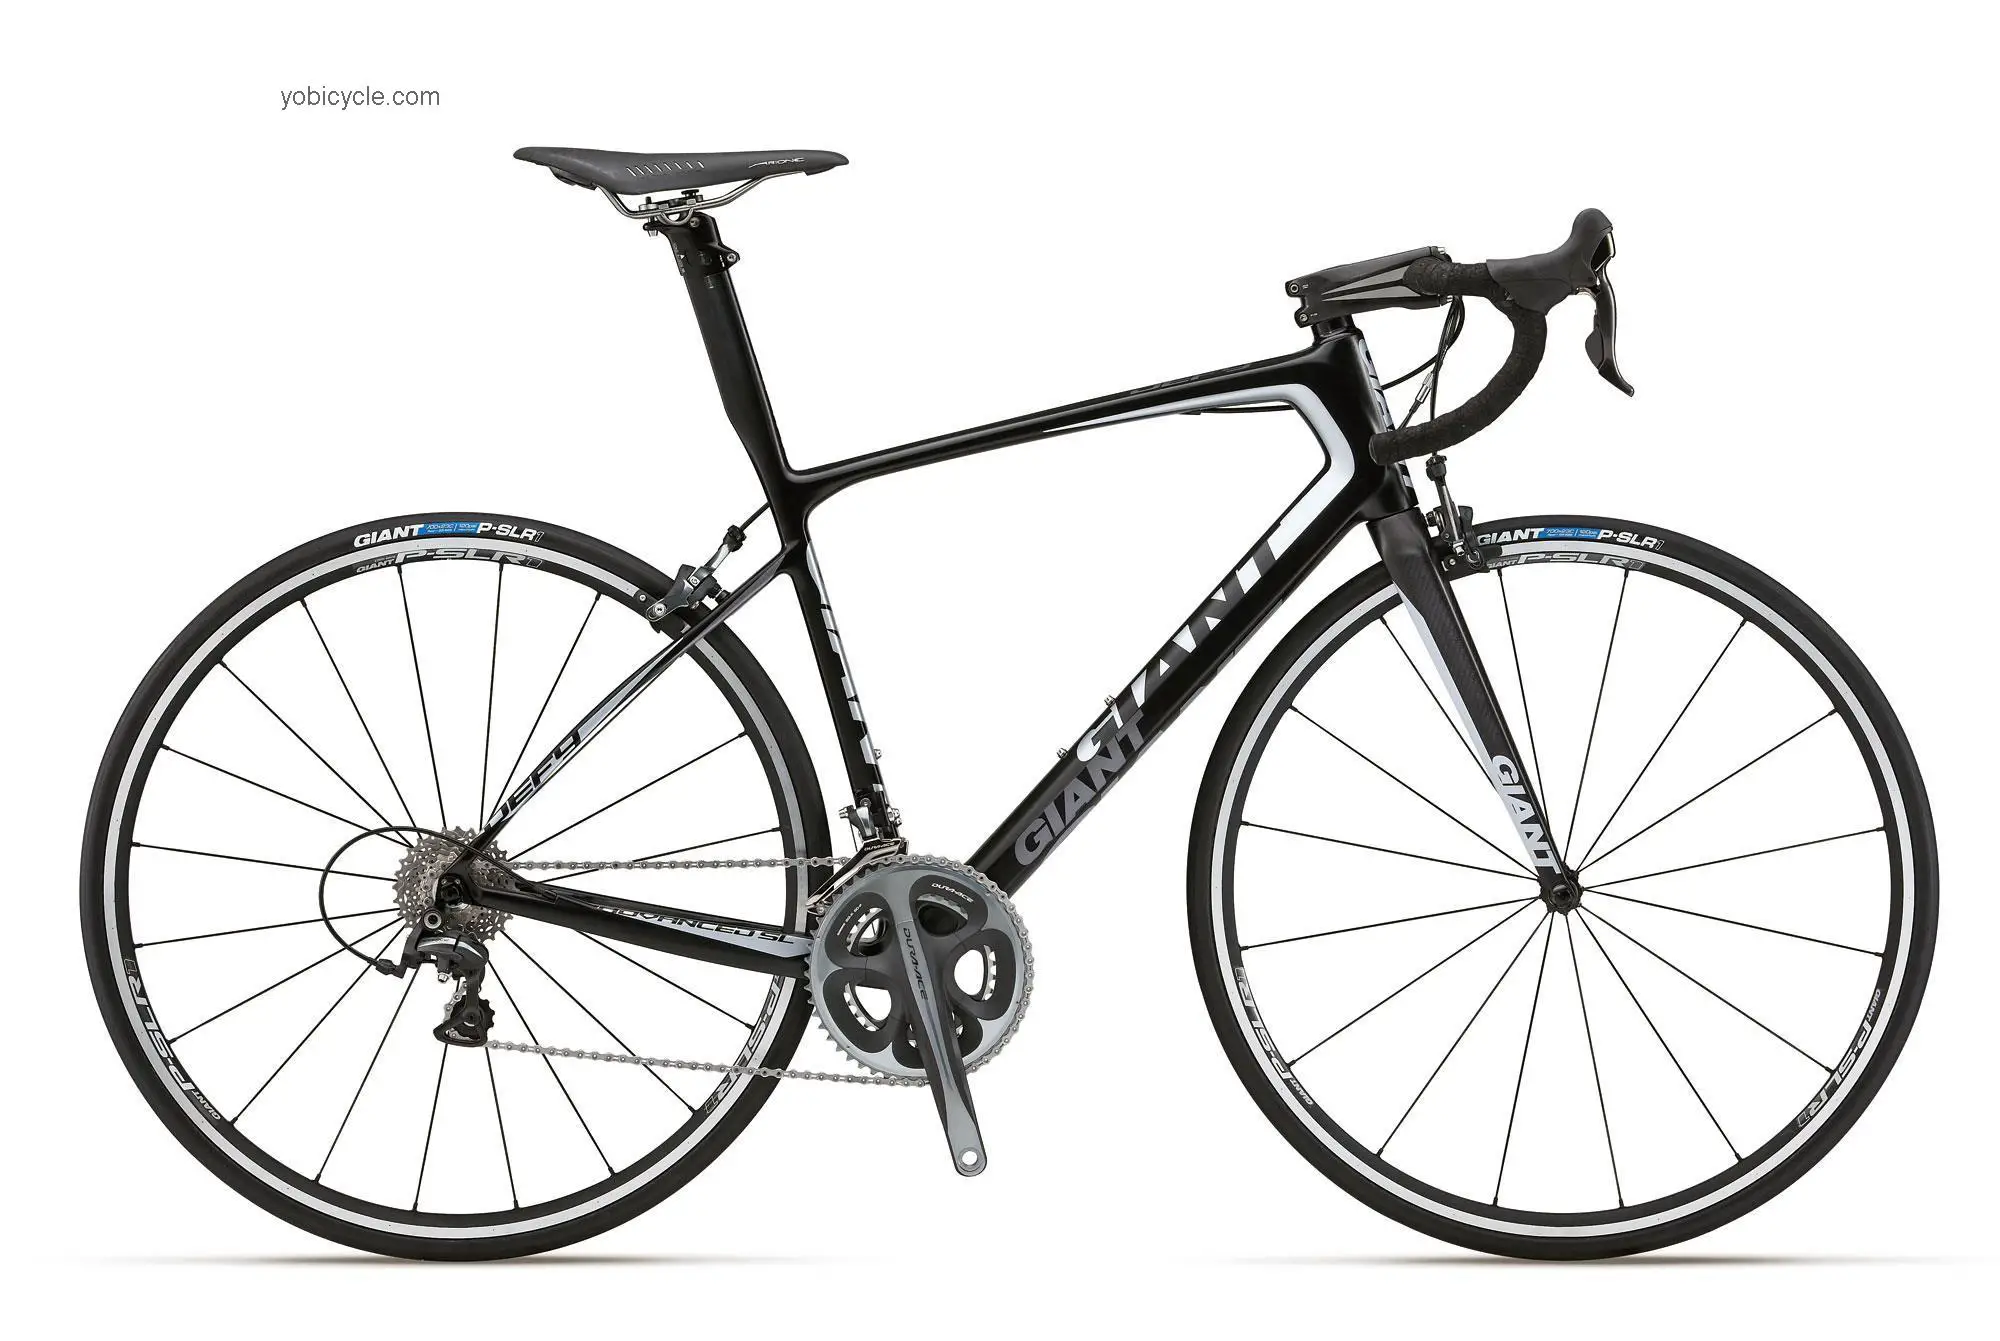 Giant Defy Advanced SL 0 ISP 2012 comparison online with competitors